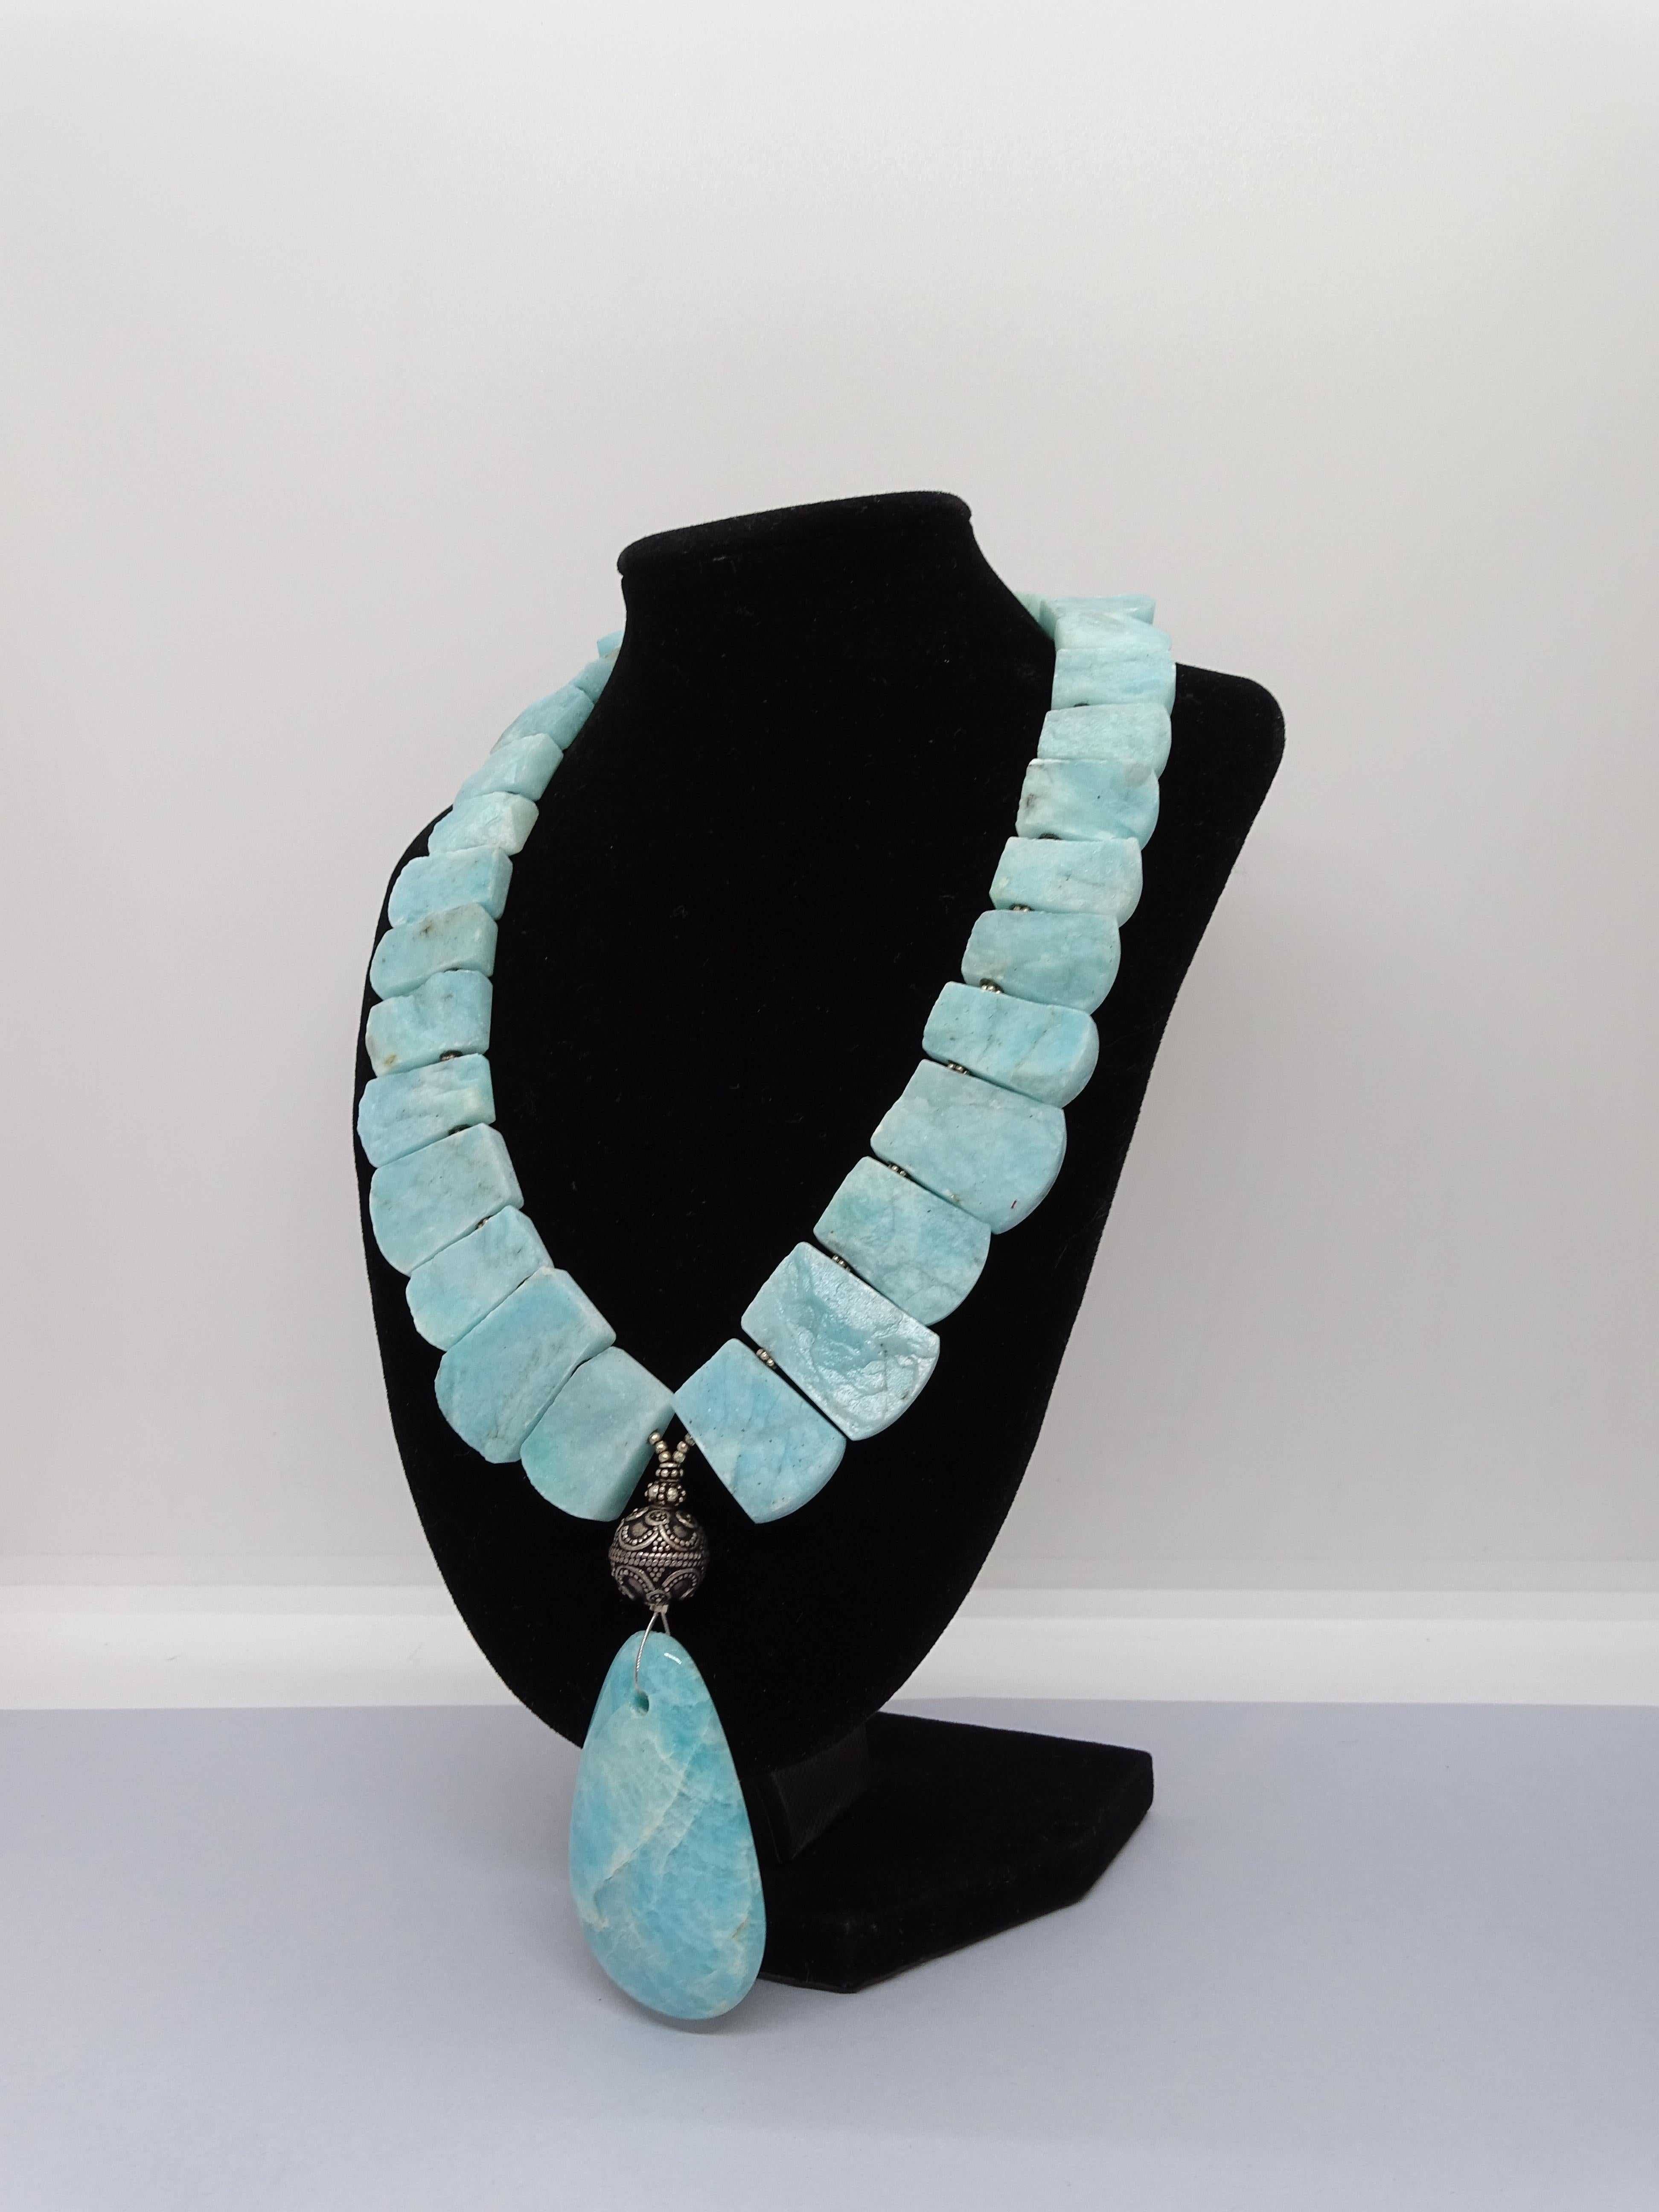 Amazonite and silver  French Pendant  Necklace, France  8